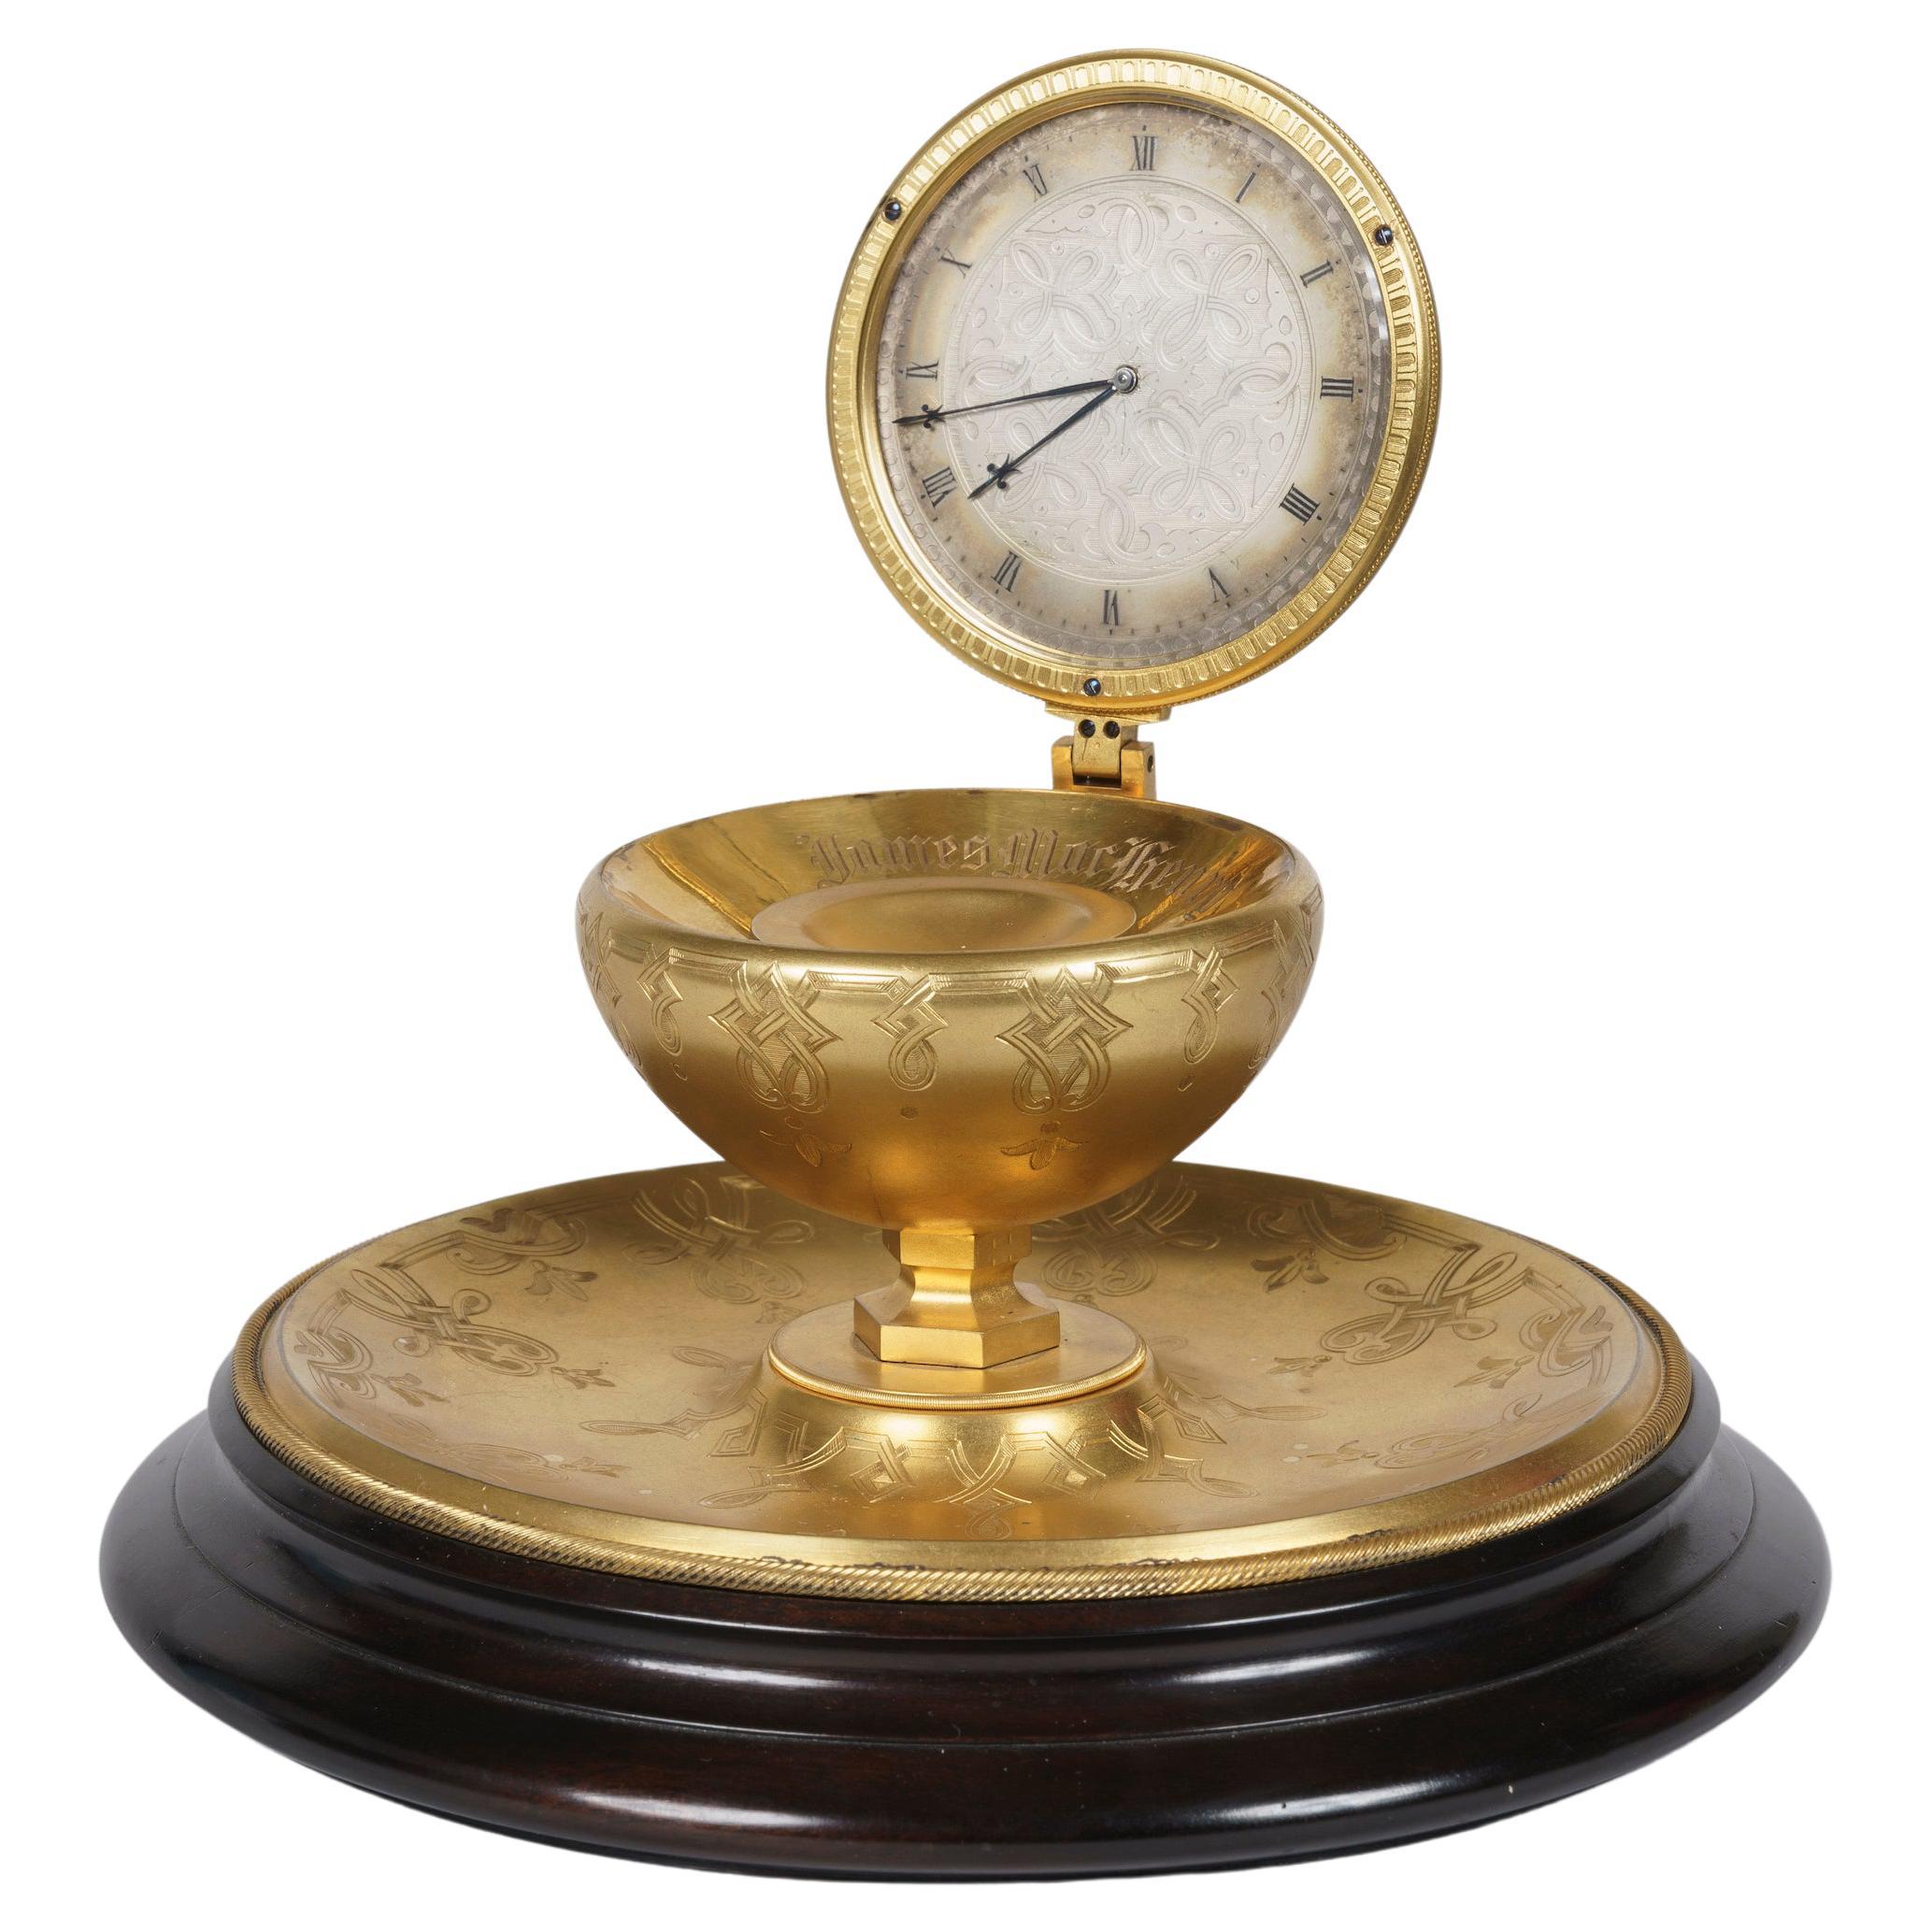 Rare 19th Century Brass Engraved 'Inkwell' Table Clock attributed to Thomas Cole